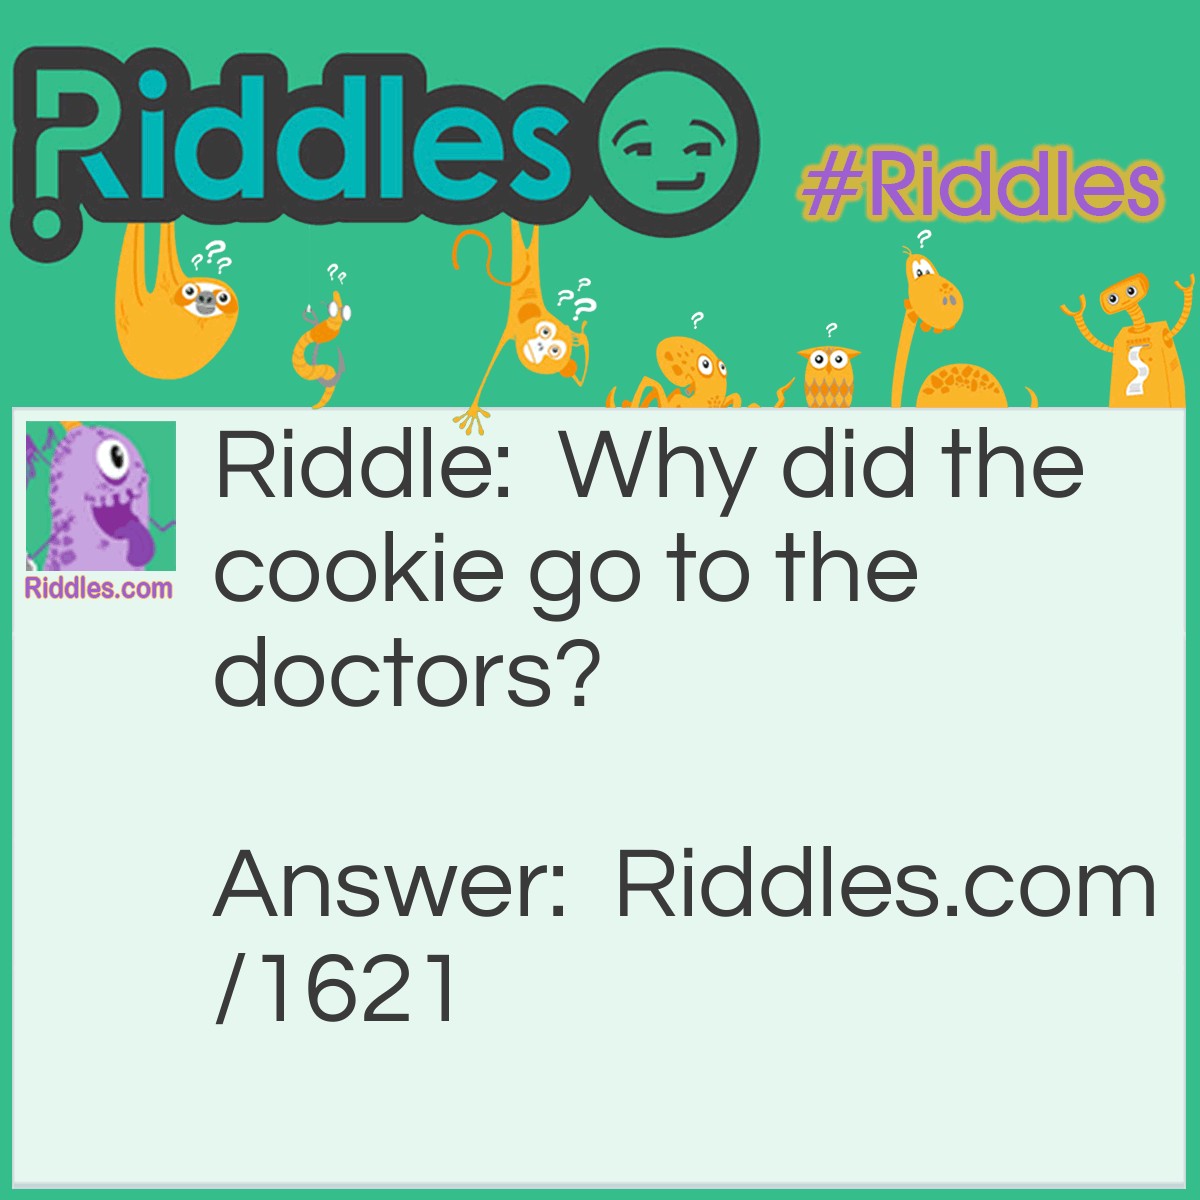 Riddle: Why did the cookie go to the doctors? Answer: It felt crummy.